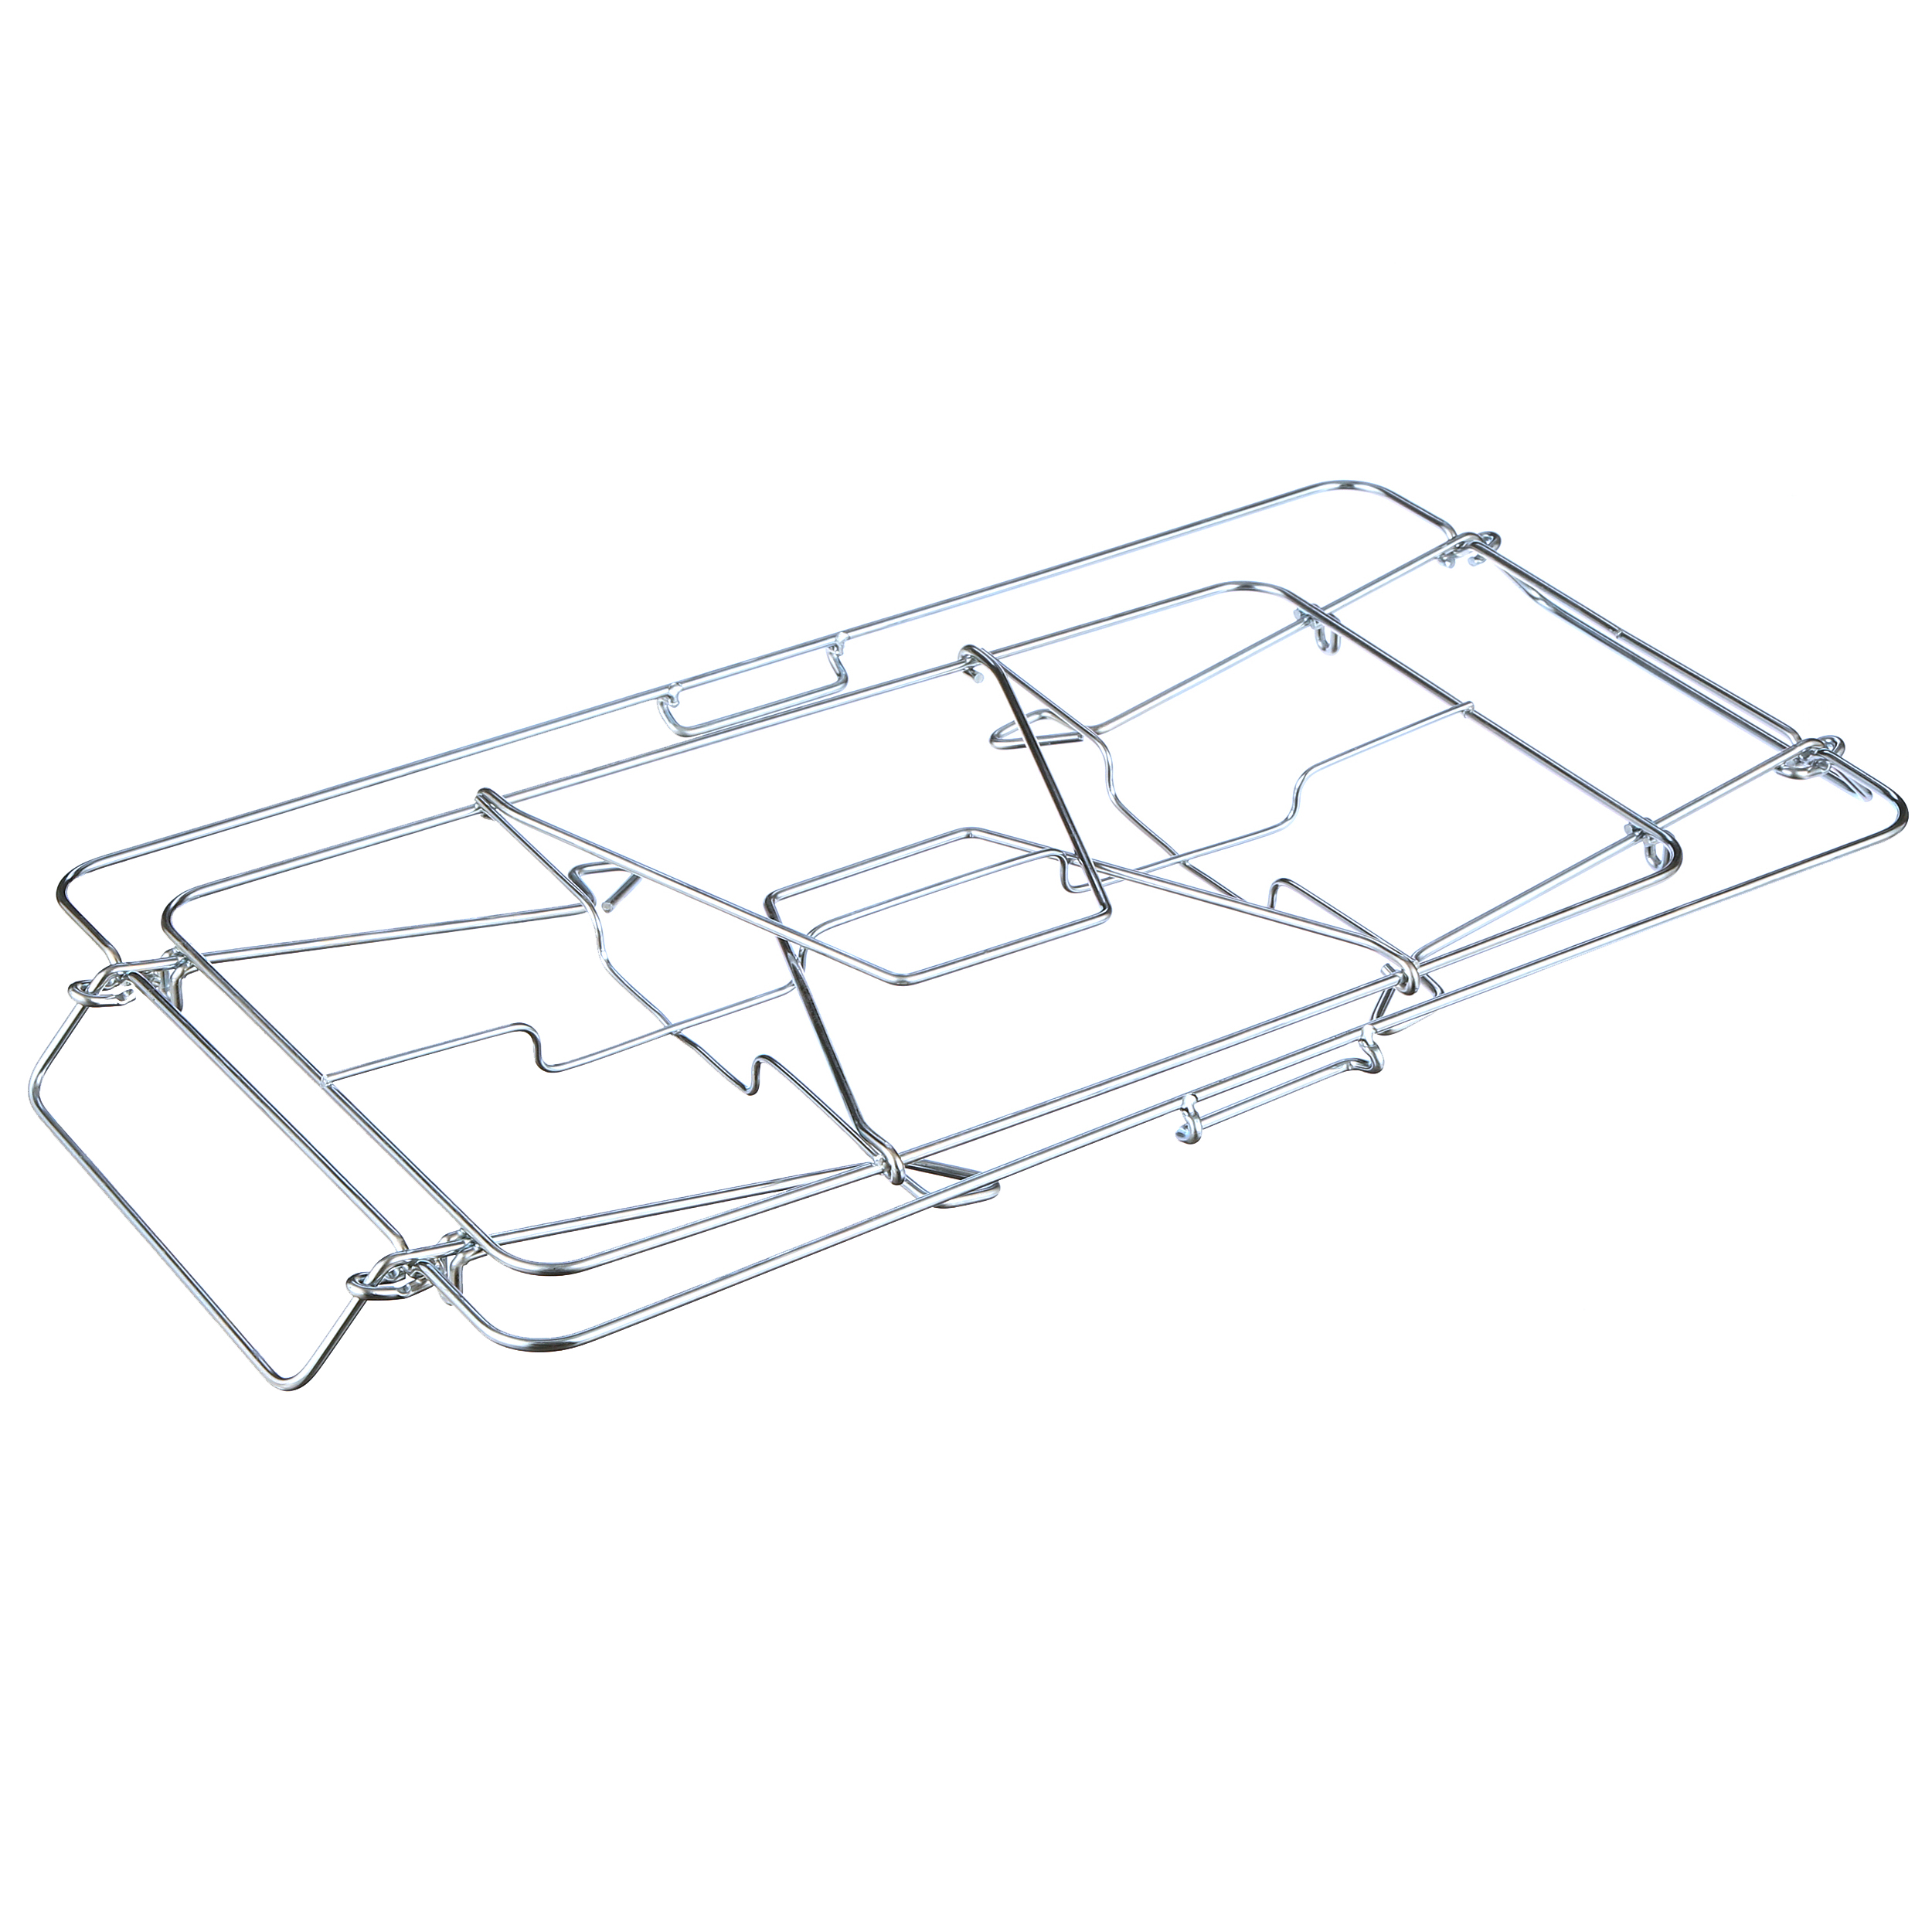 Sterno Folding Wire Chafing Rack, Standard Size, Silver - image 4 of 6